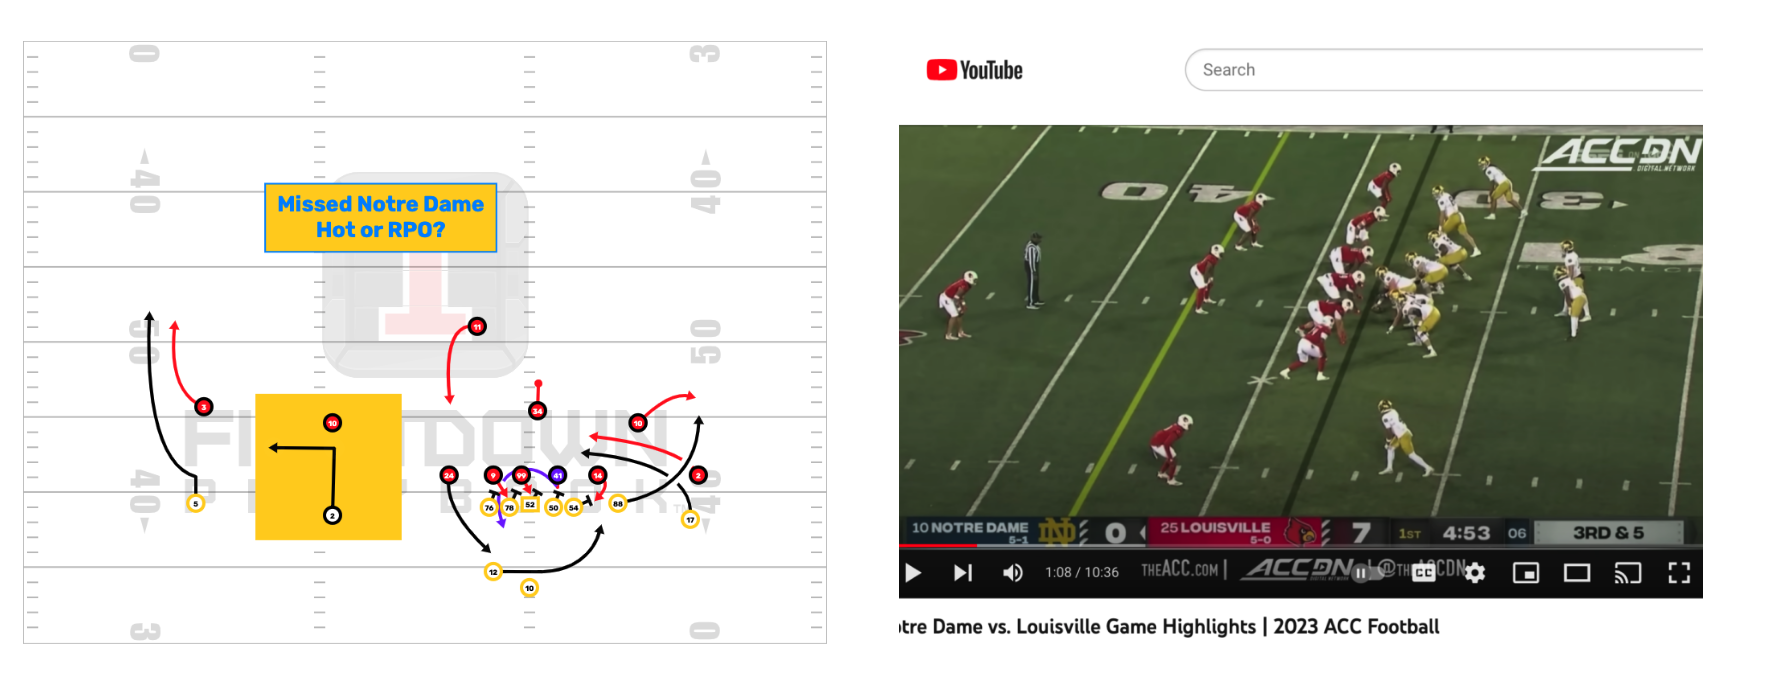 Notre Dame Missed RPO Or Hot?